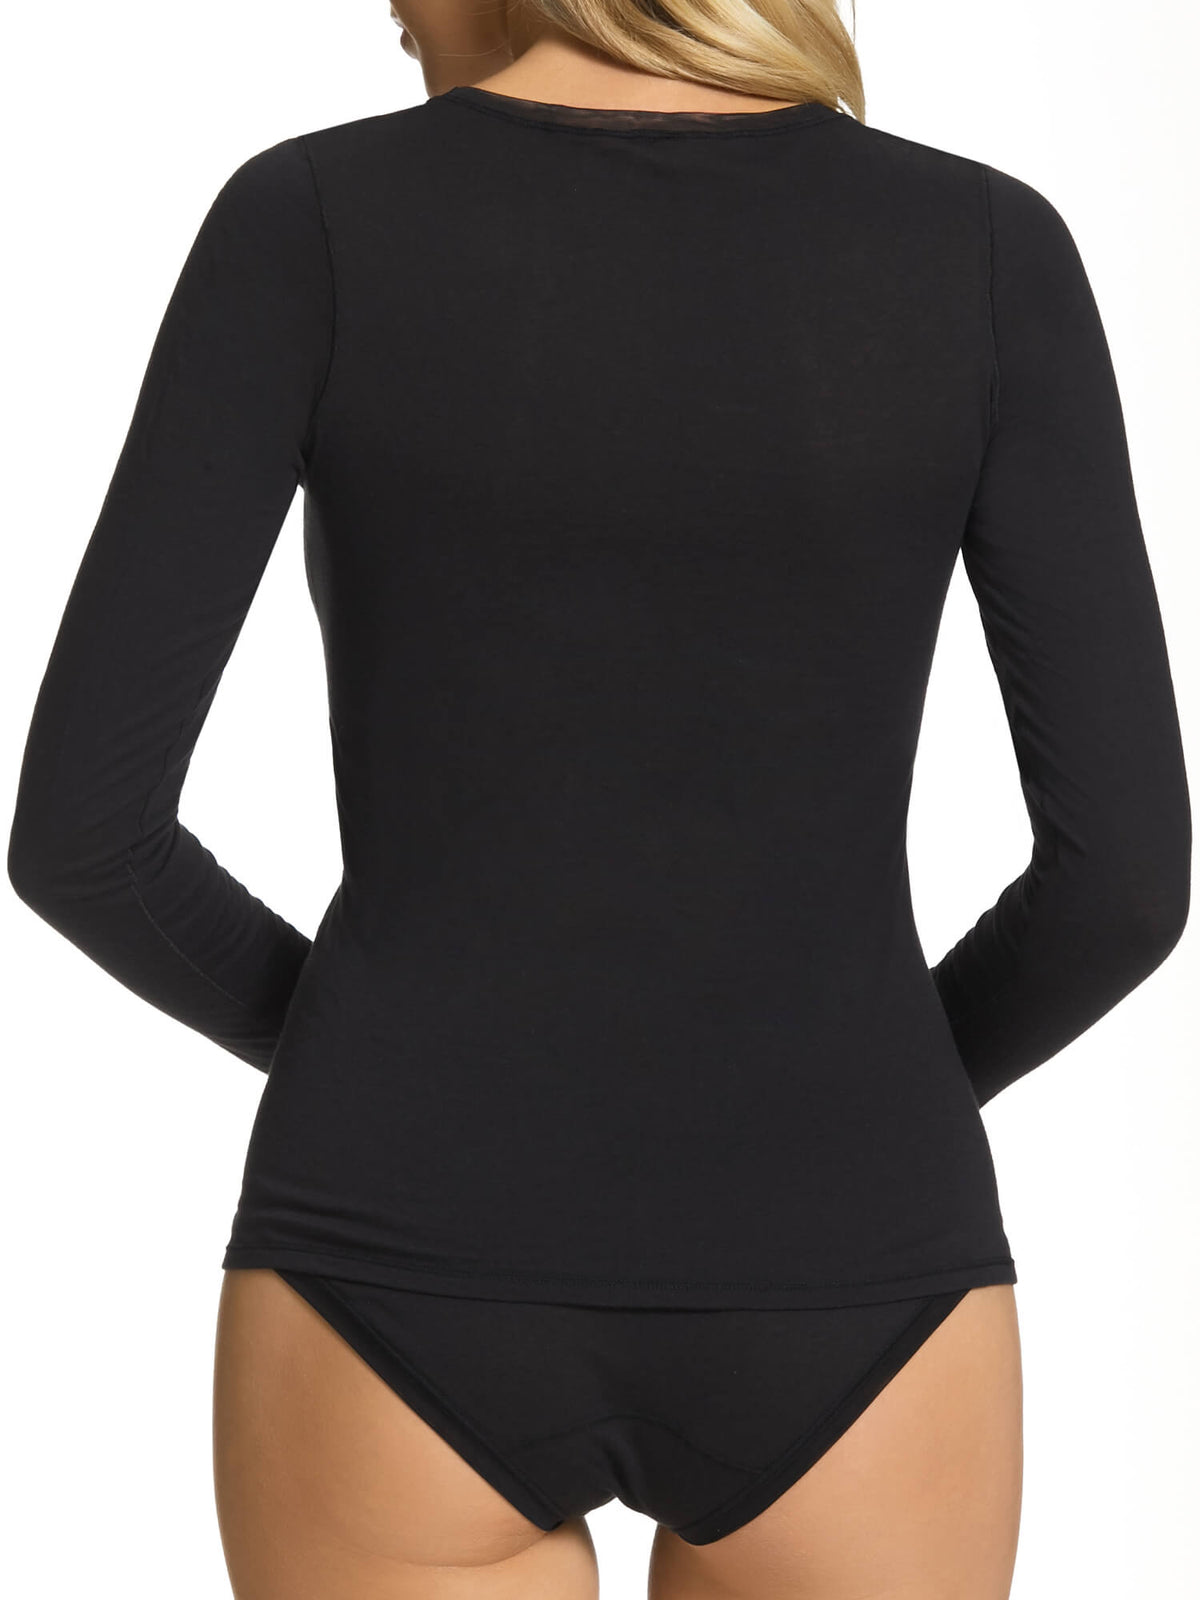 Pure Cotton Long Sleeve Top in Black - Kayser Lingerie